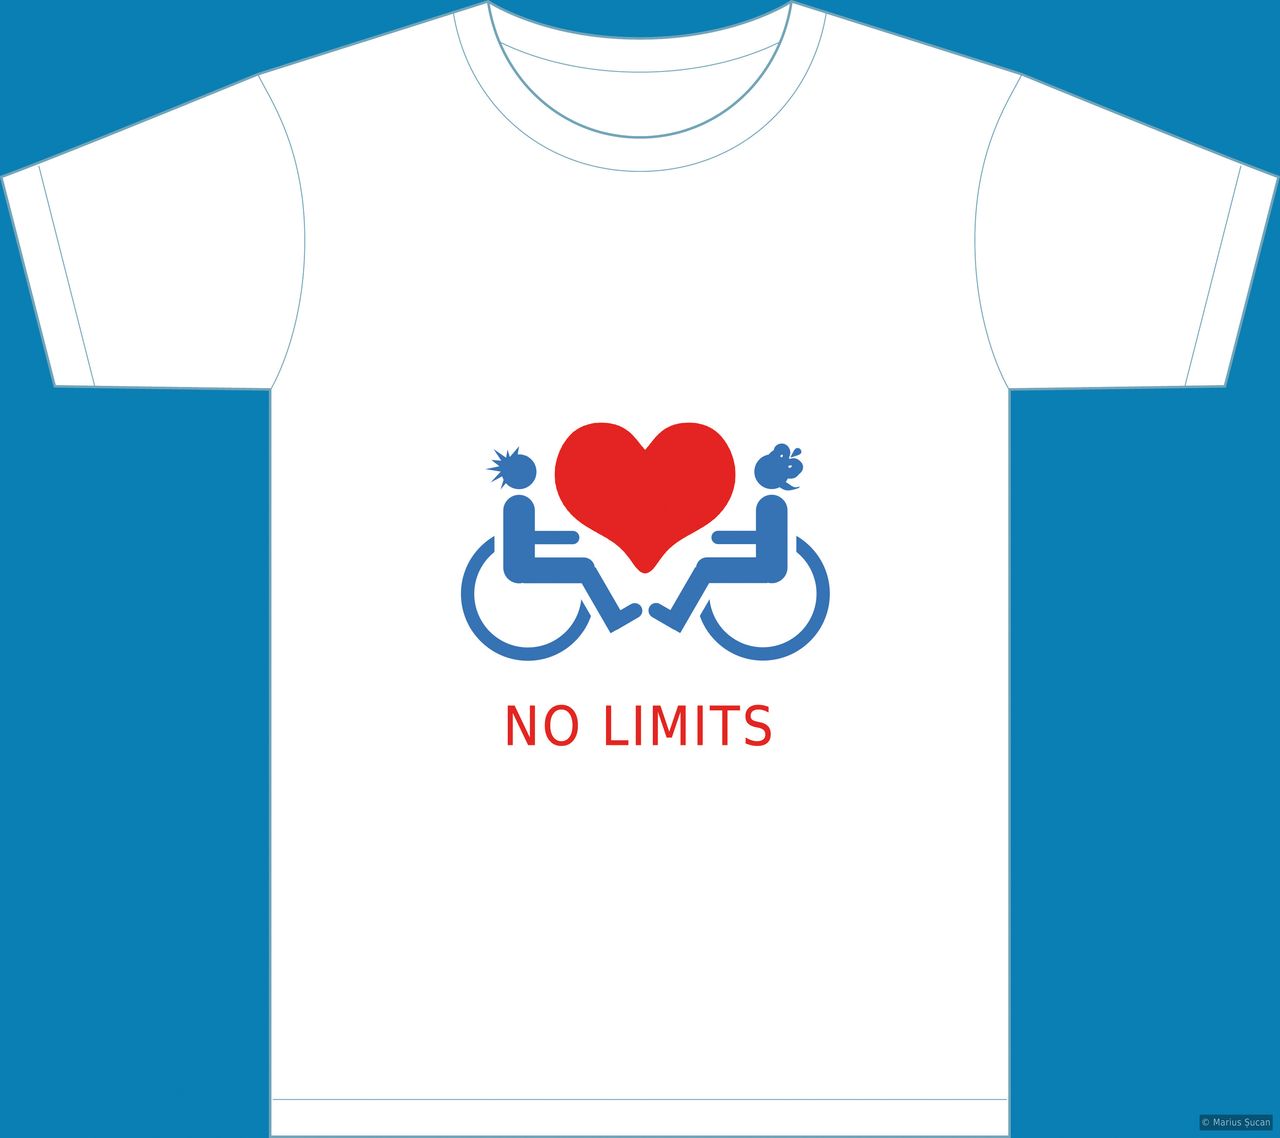 Love has no limits for people with disabilities